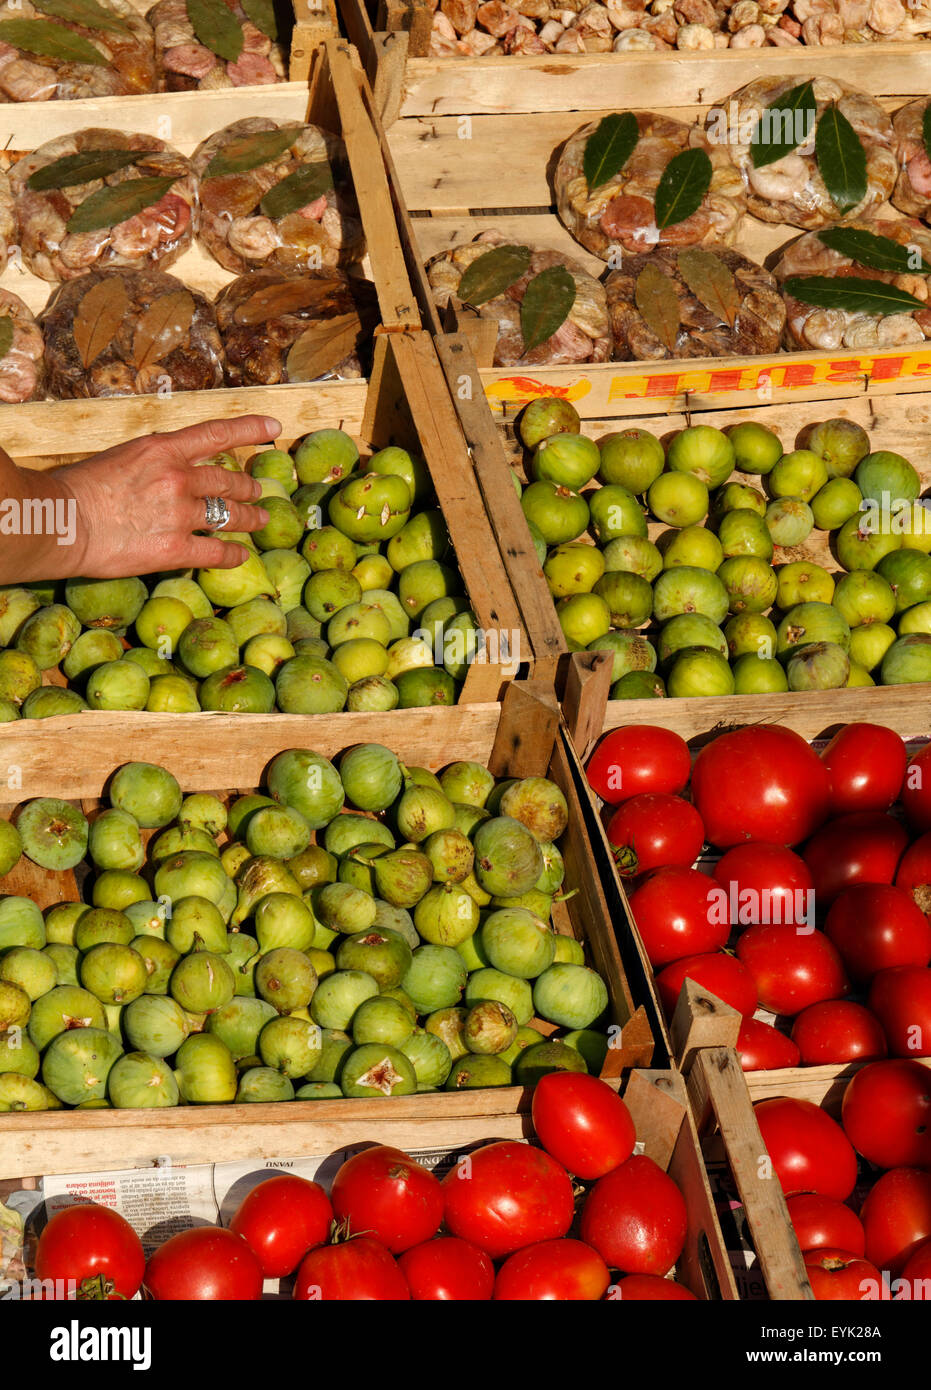 Fruits and vegetables market stall by a road, Croatia Stock Photo